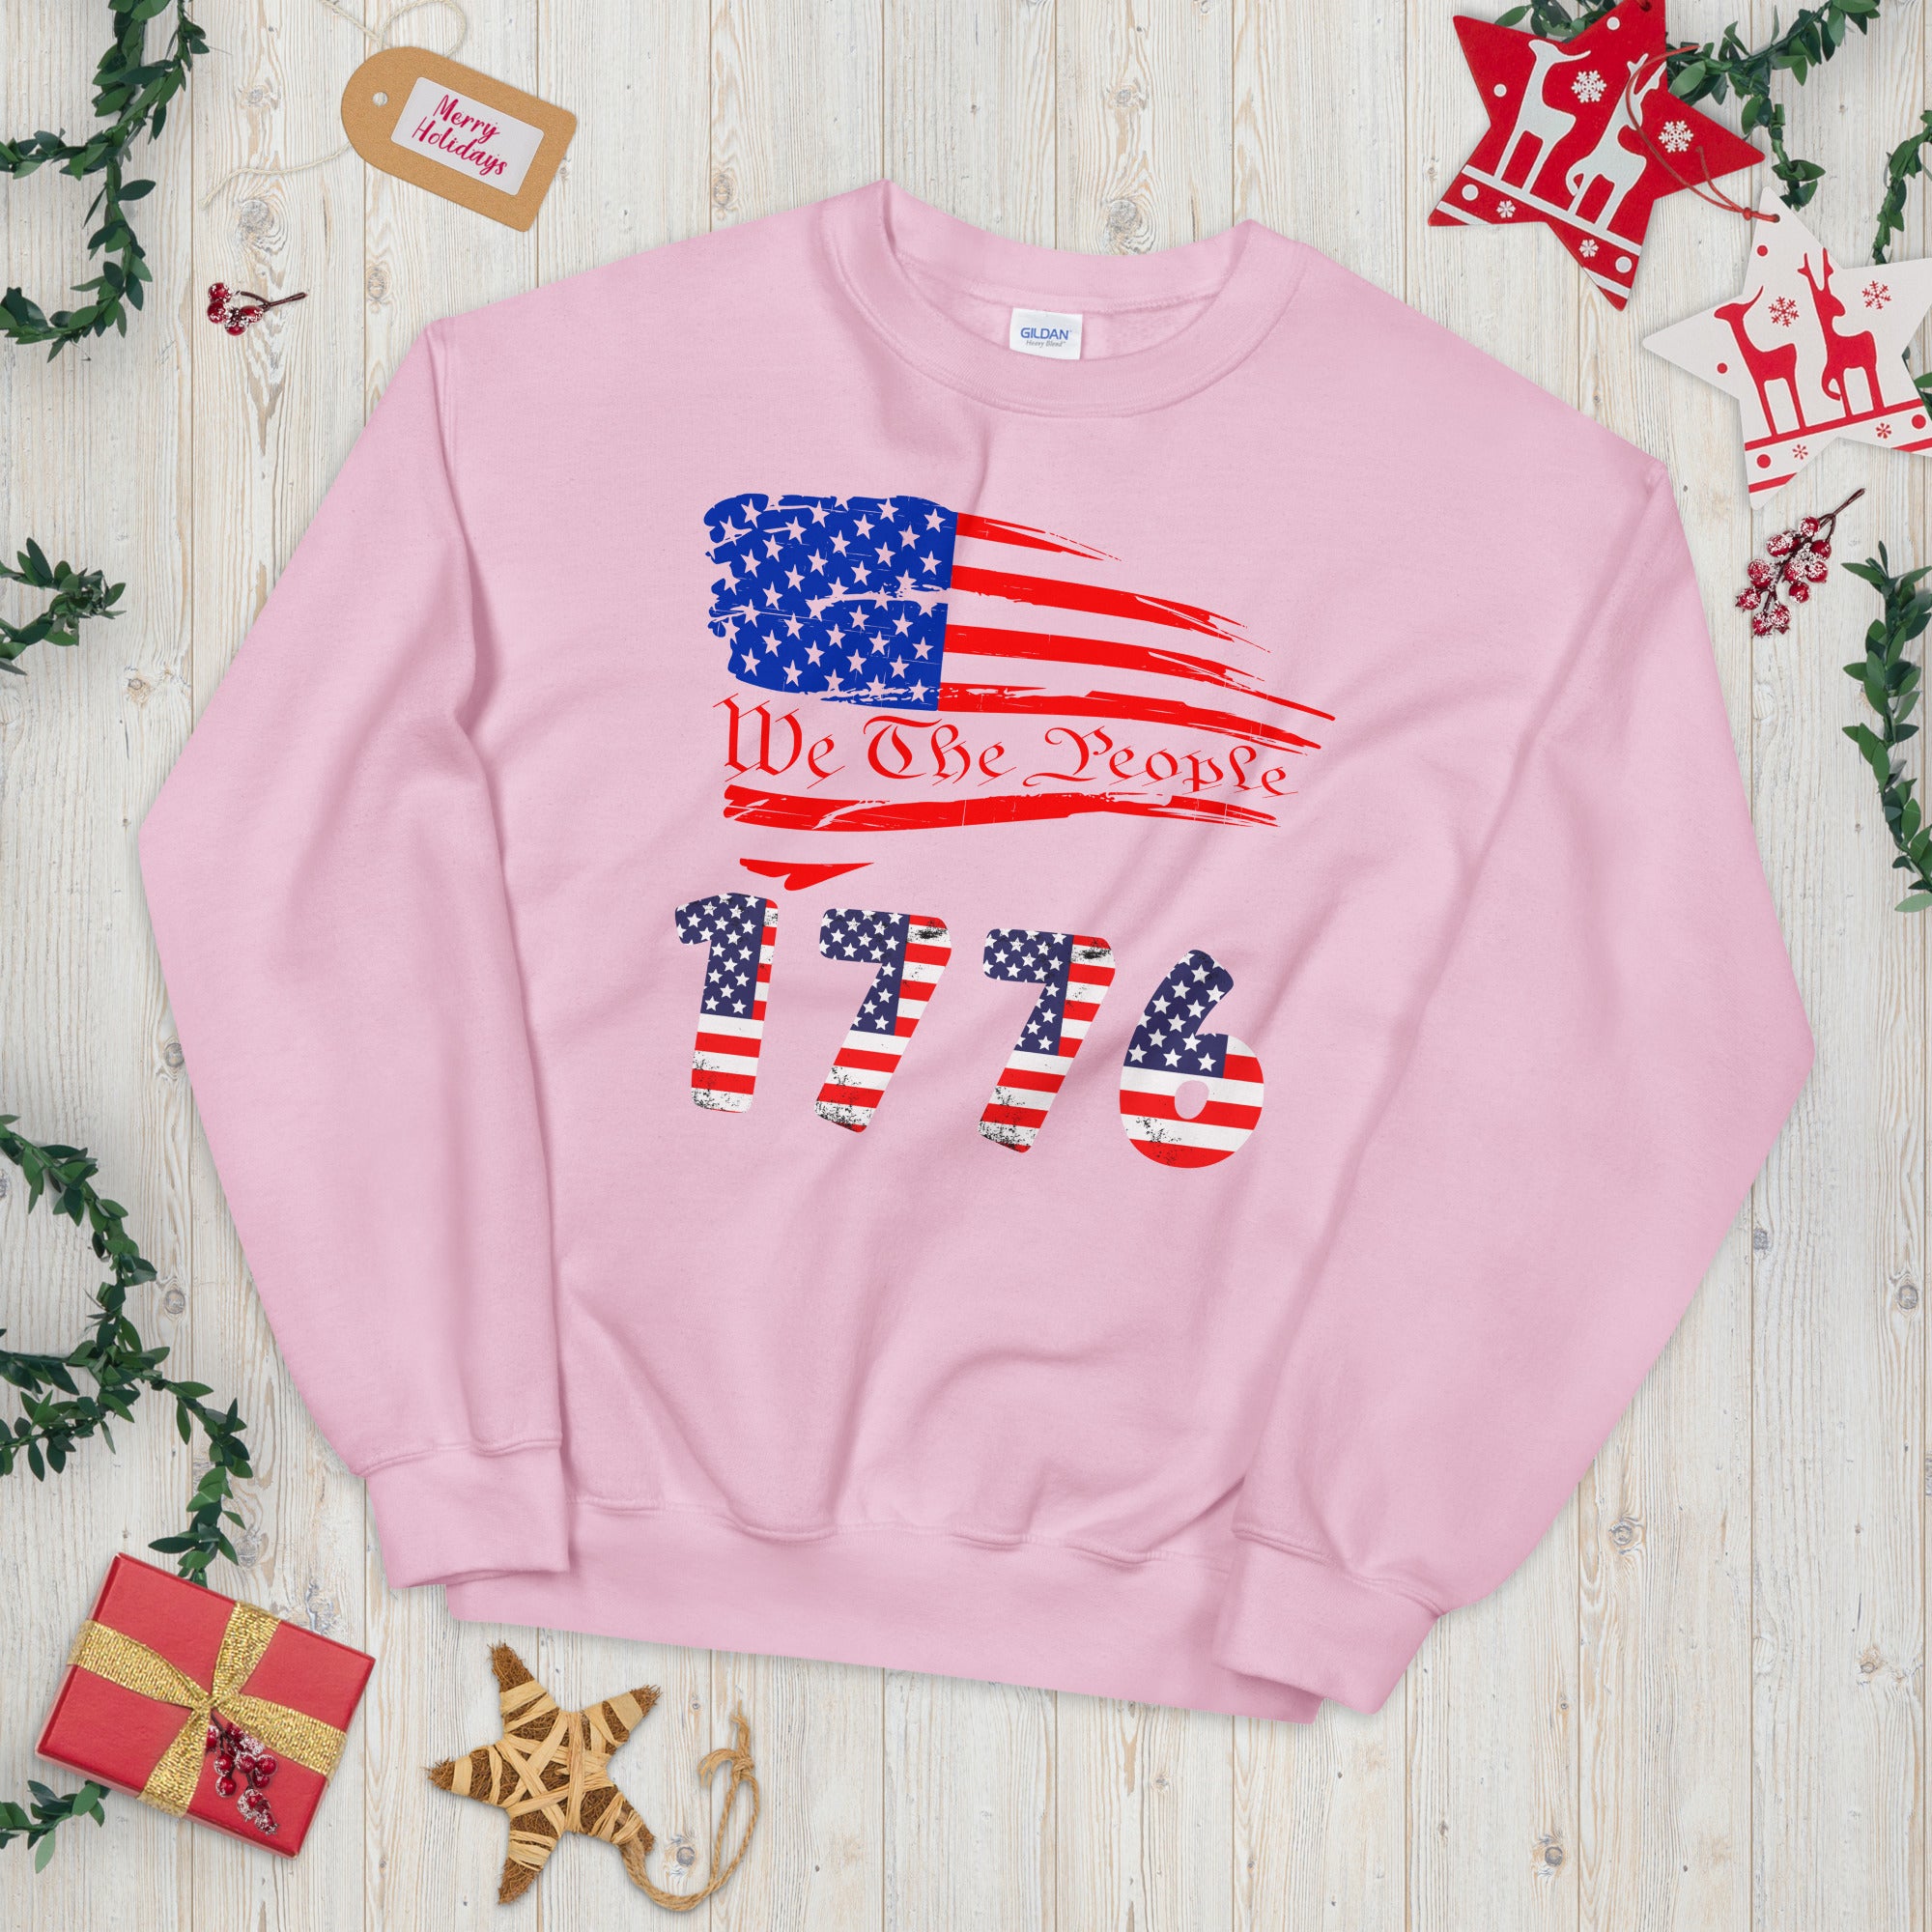 We The People Sweatshirt, 1776 Sweater, Patriotic Shirt, Fourth of July, USA American Flag, American Pride, American Patriot Gifts - Madeinsea©